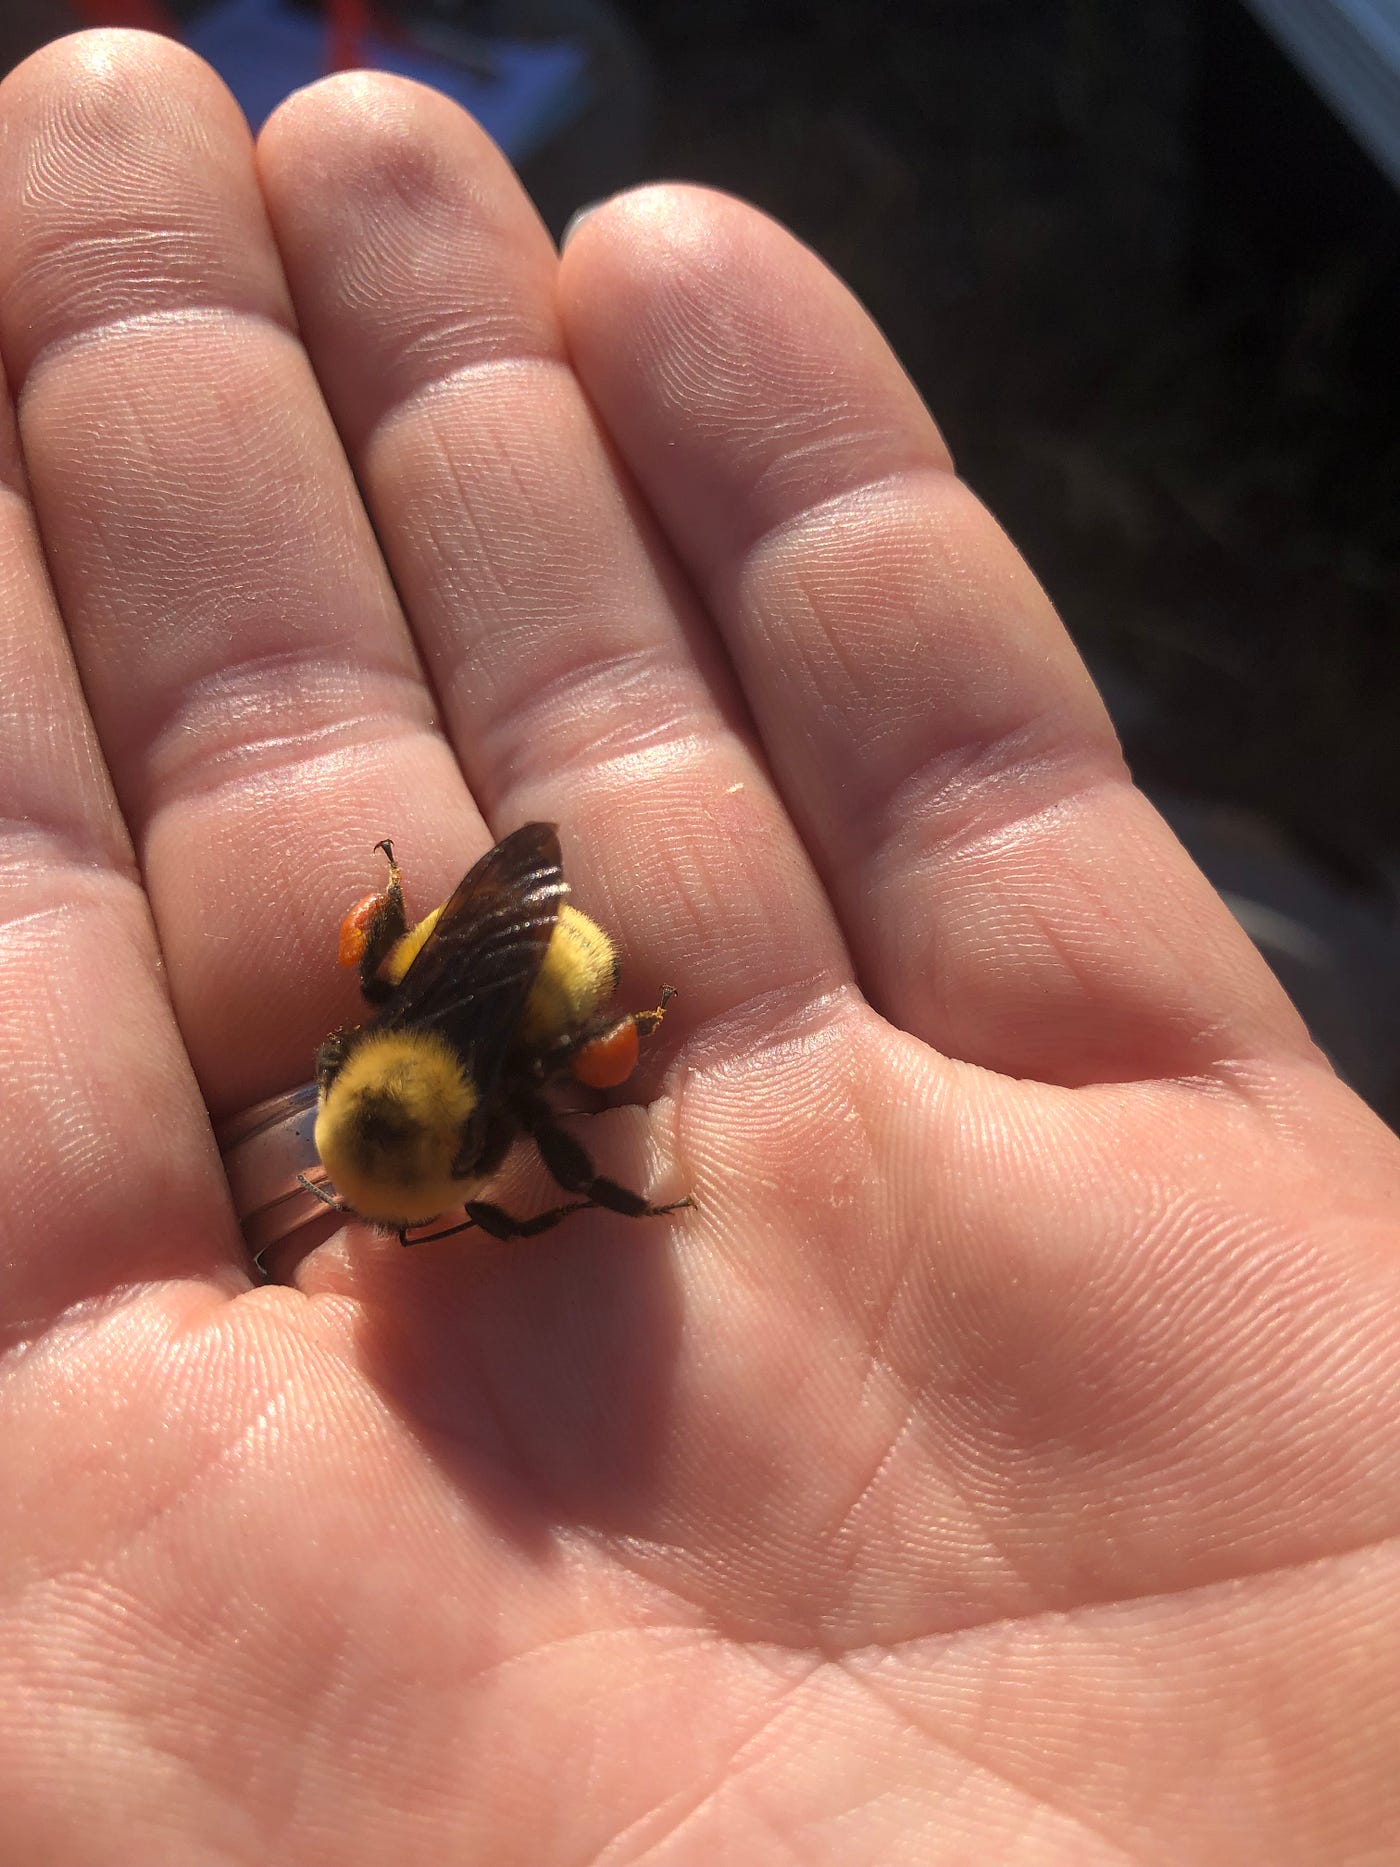 Scientists fail to locate once-common CA bumble bees